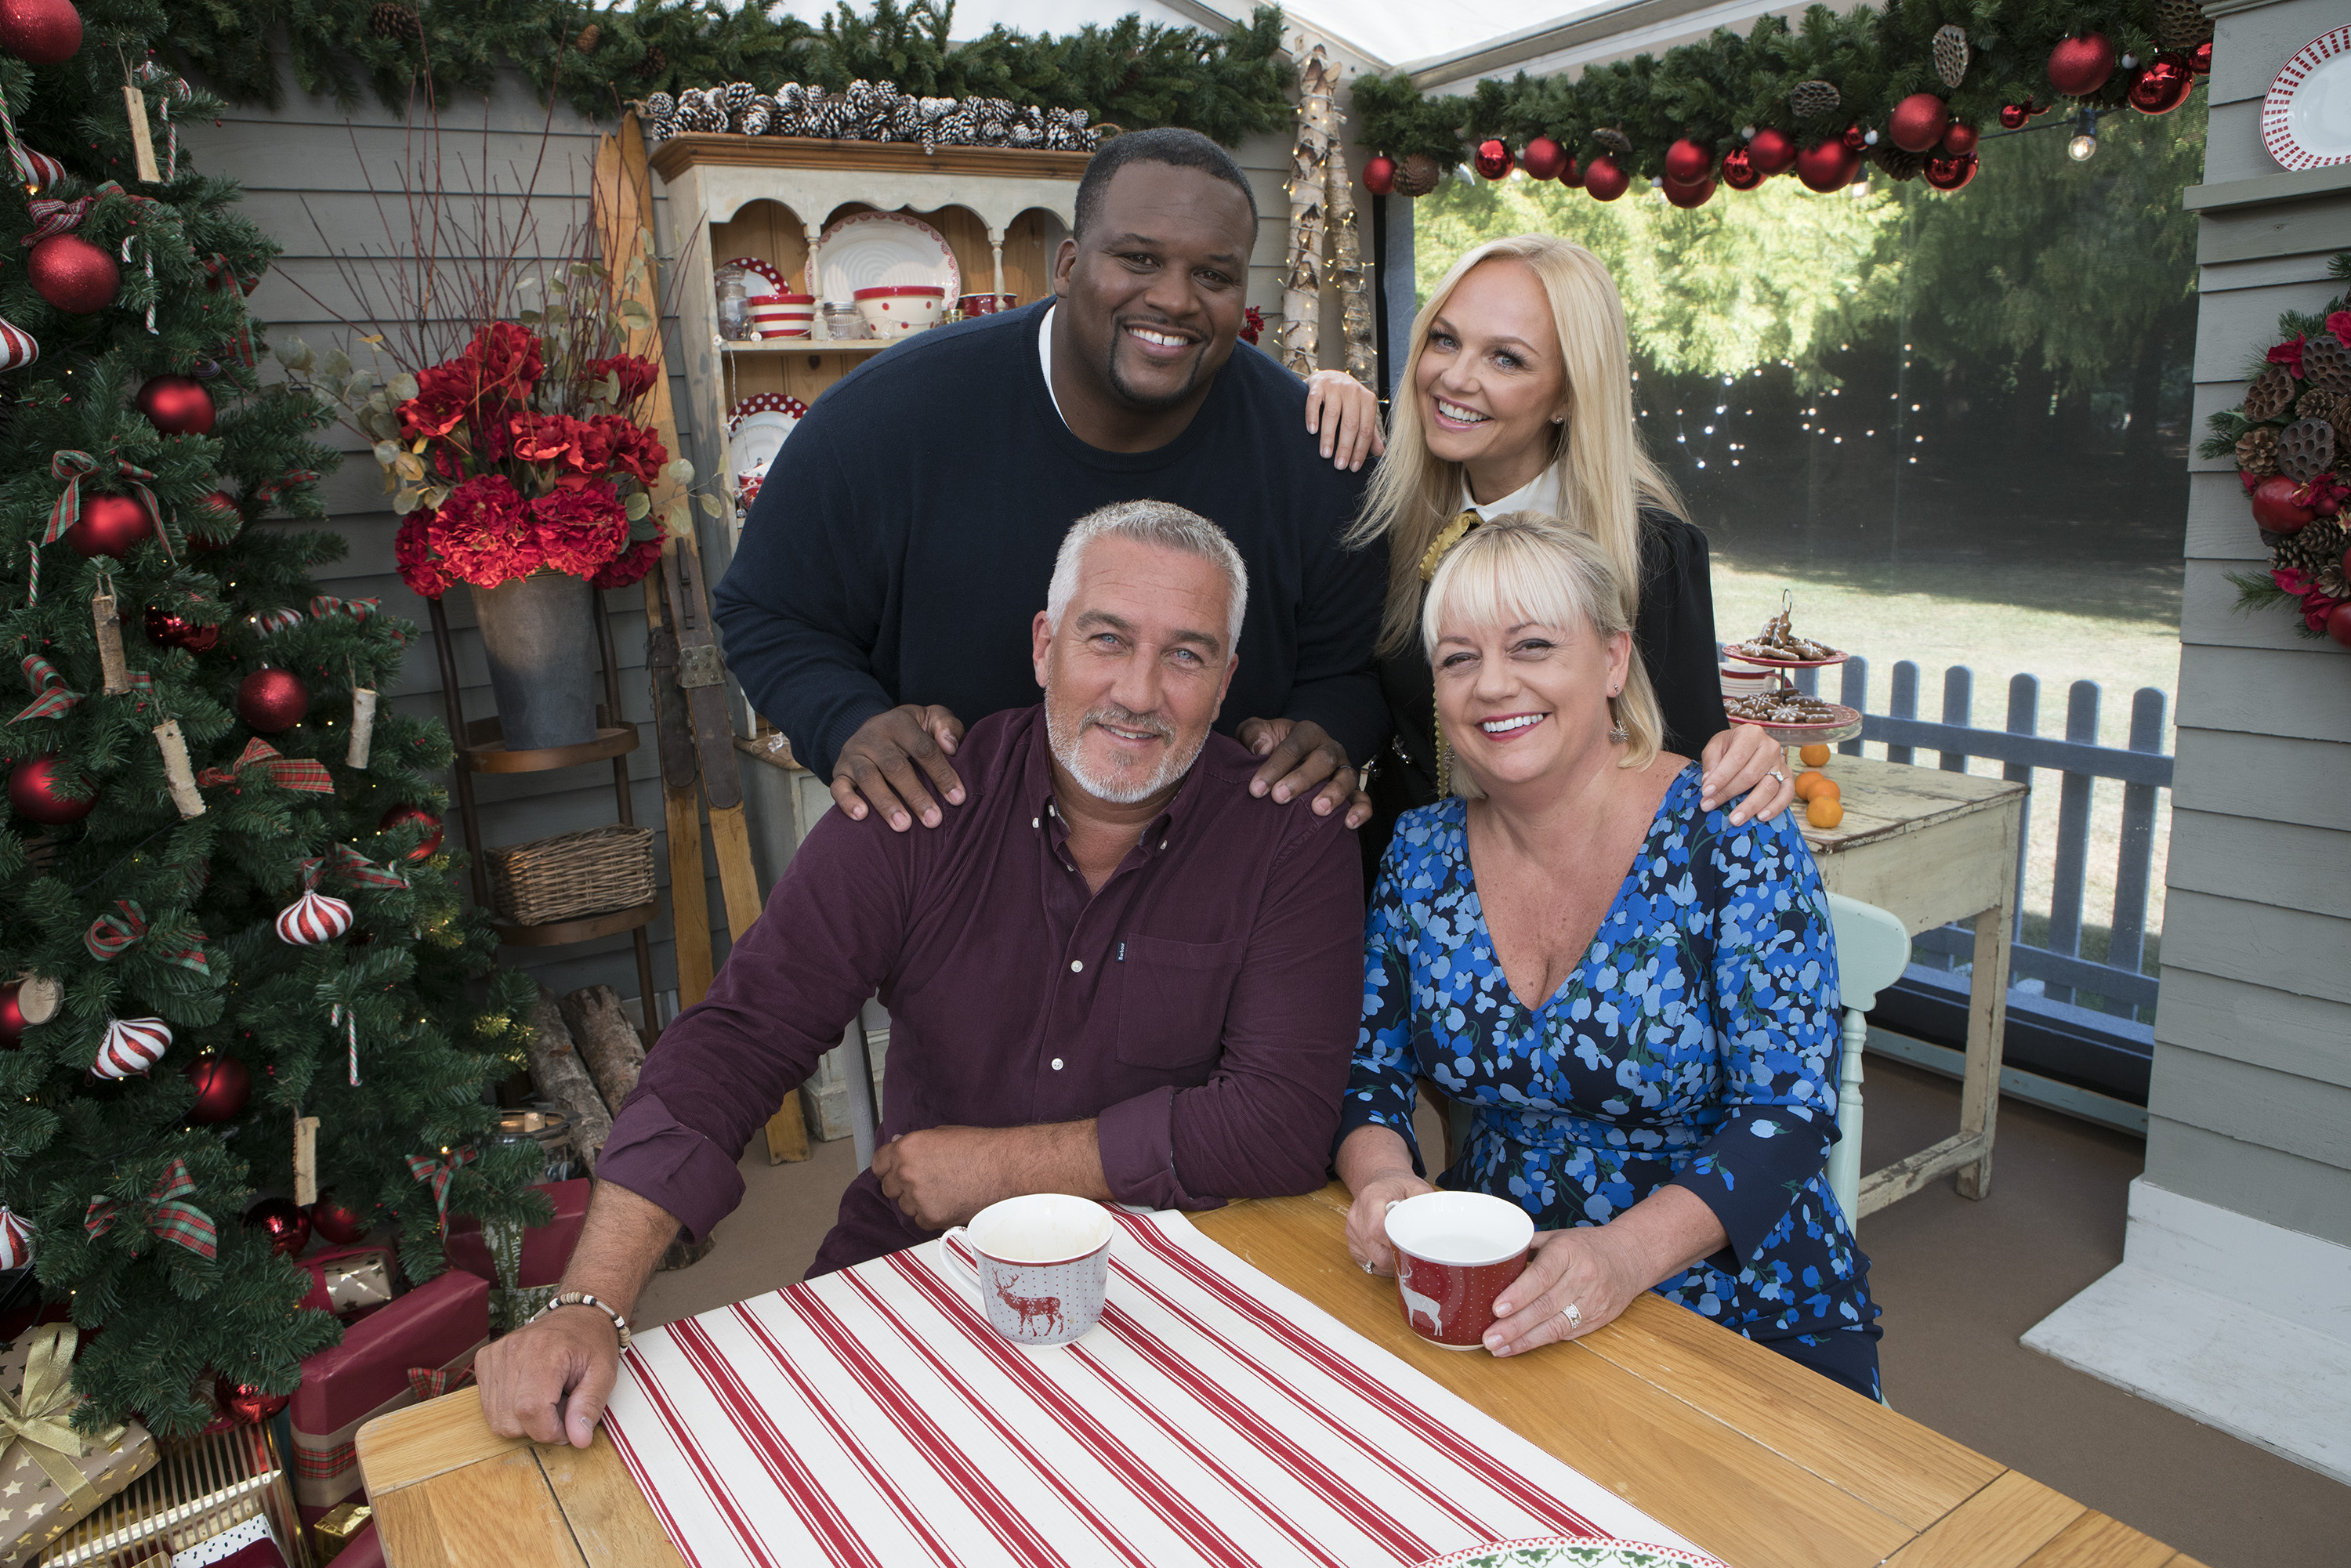 The Great American Baking Show ABC TV Show Season 4 Viewer Votes